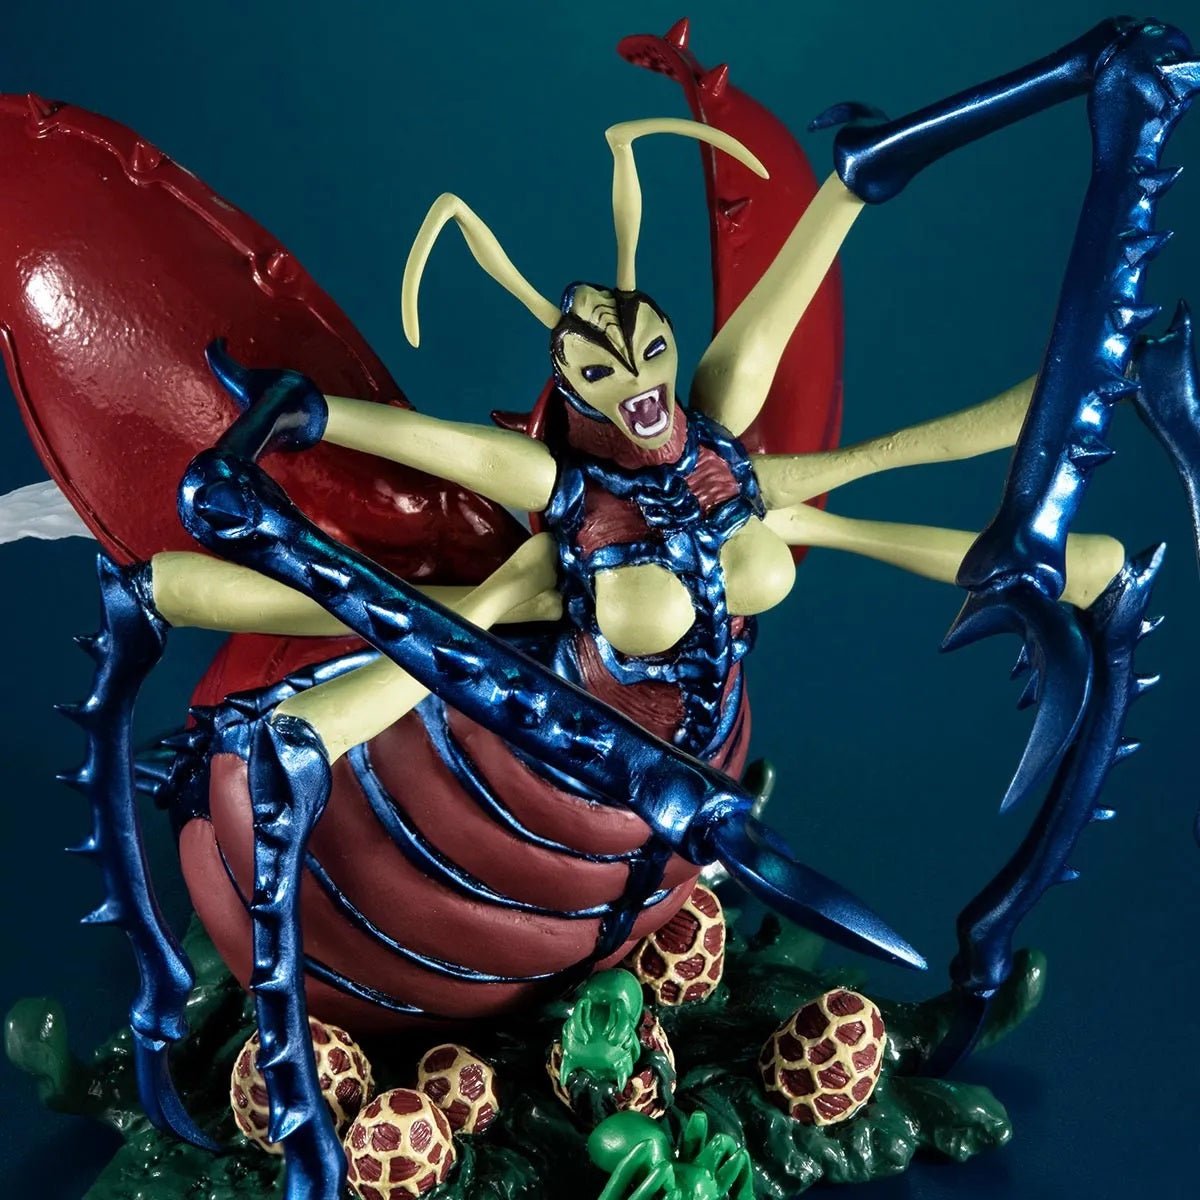 MegaHouse "Yu - Gi - Oh!" Monsters Chronicle Insect Queen Collectible Figure